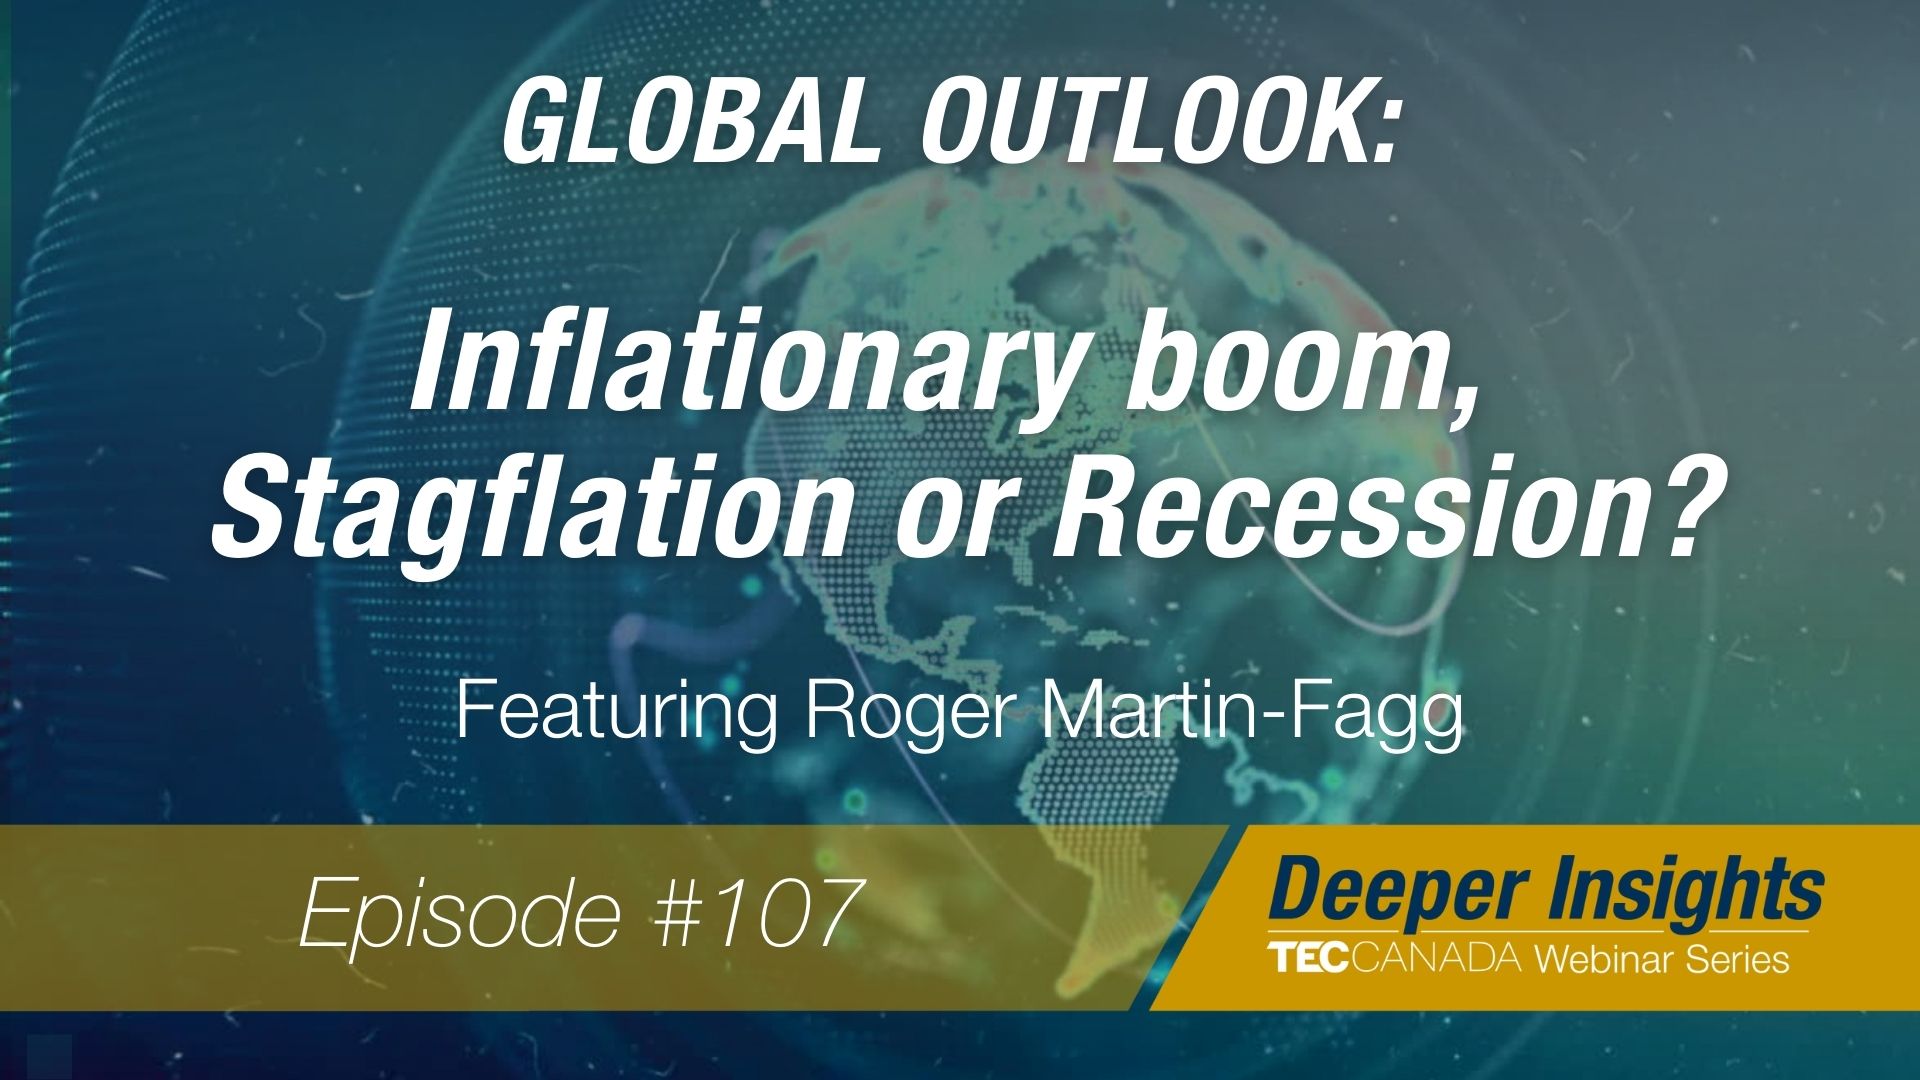 Roger Martin-Fagg: Global Outlook: Inflationary Boom, Stagflation or Recession?